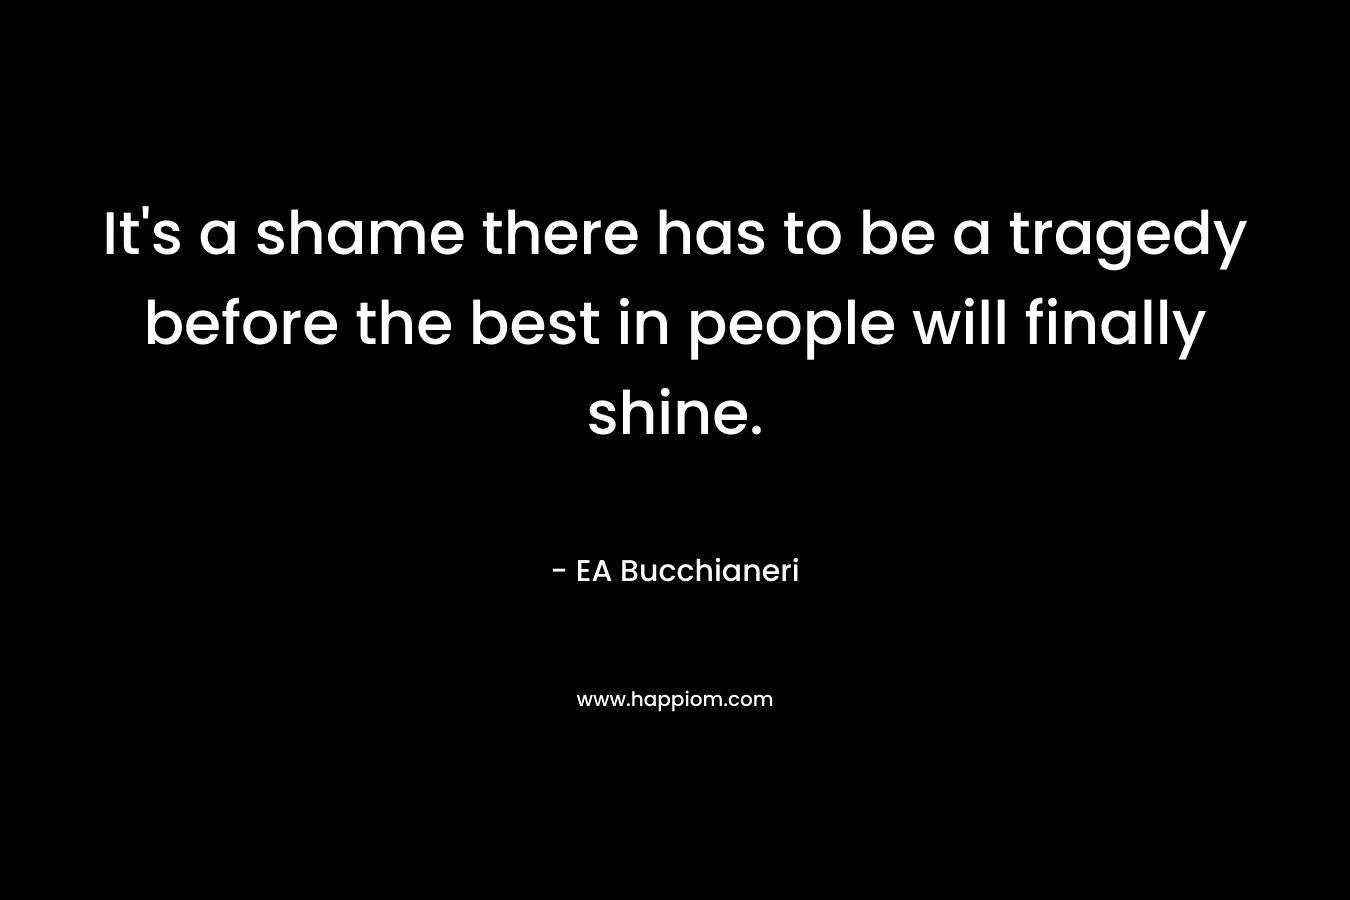 It's a shame there has to be a tragedy before the best in people will finally shine.